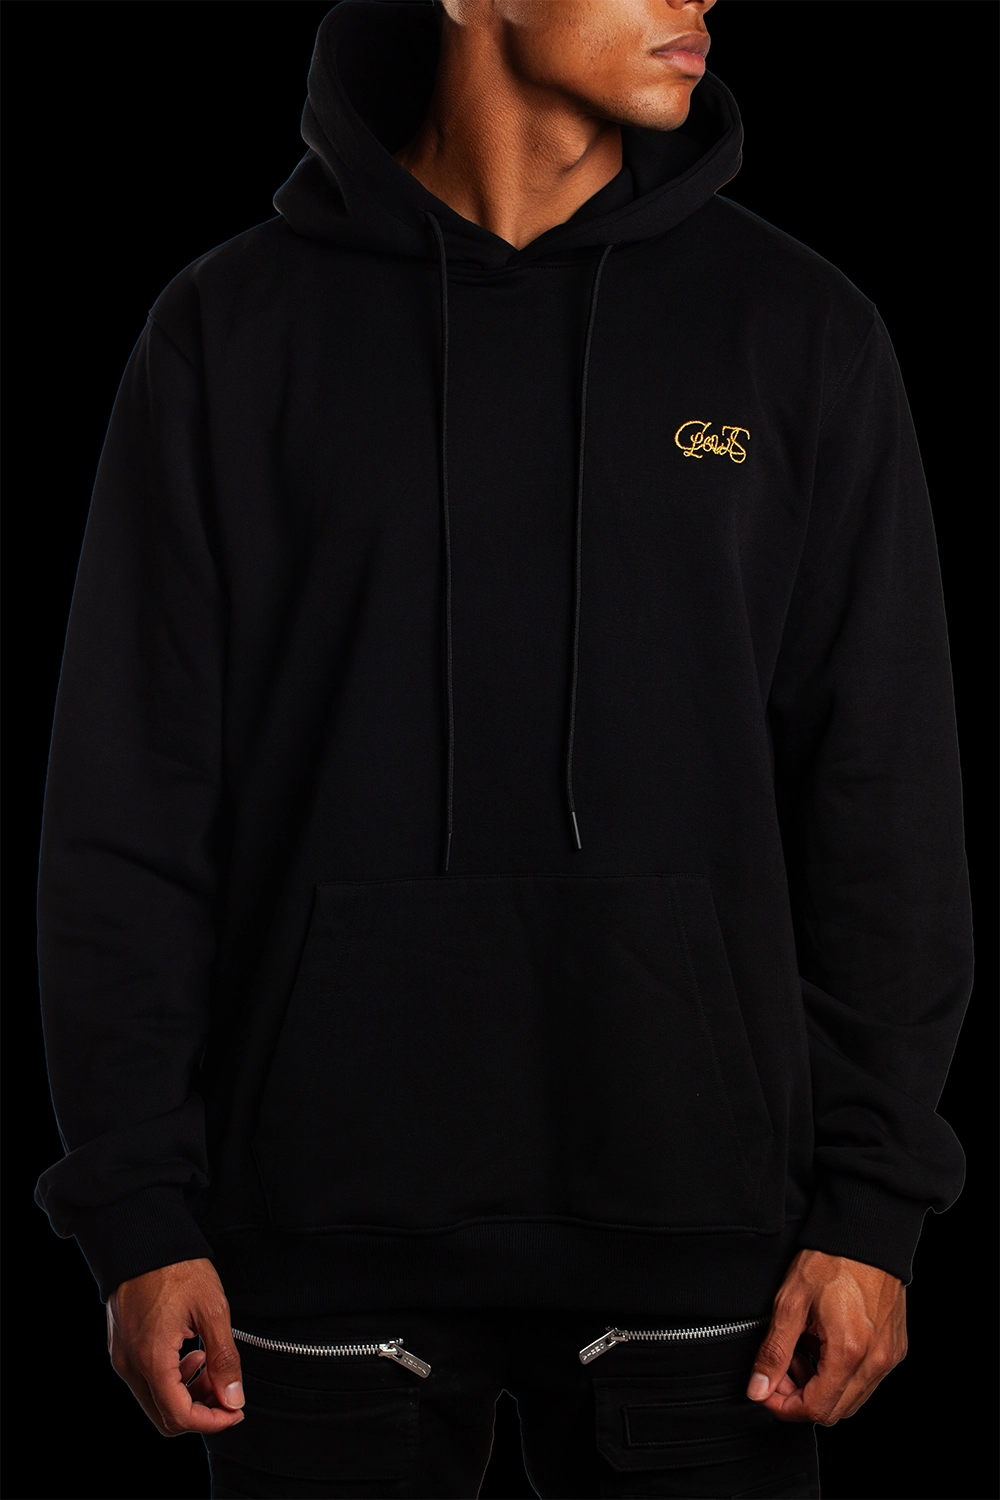 Black Hoodie embroidered with the worlds finest Piana Clerico 24-carat gold thread- made exclusively in Italy designed in Ireland